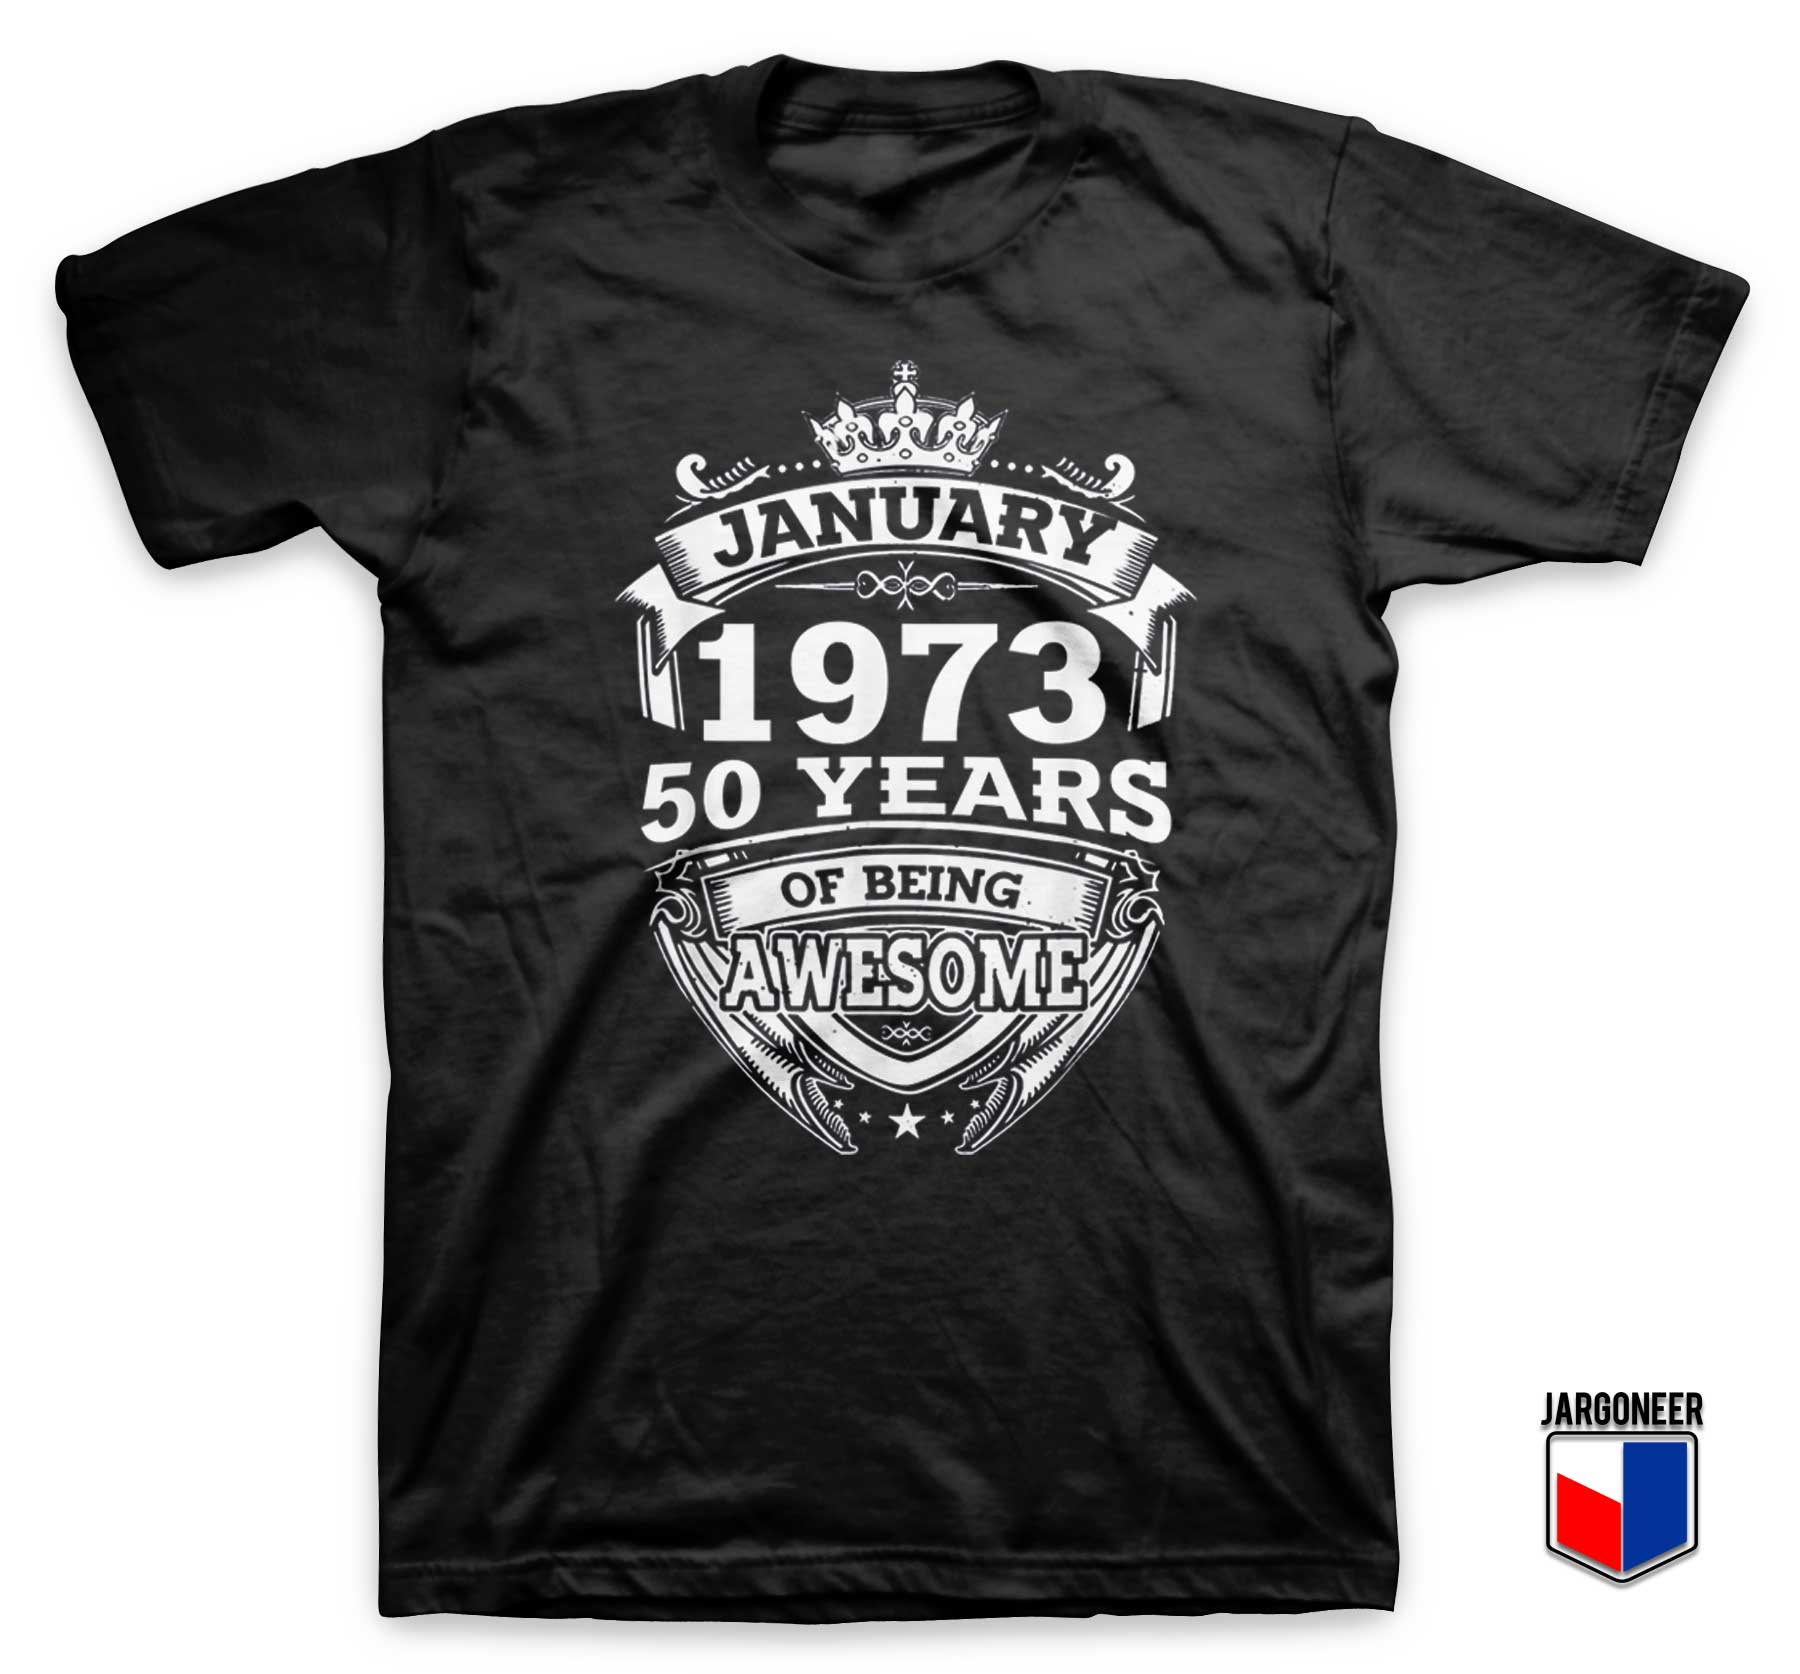 January 1973 50 Years Of Being Awesome T Shirt - Shop Unique Graphic Cool Shirt Designs